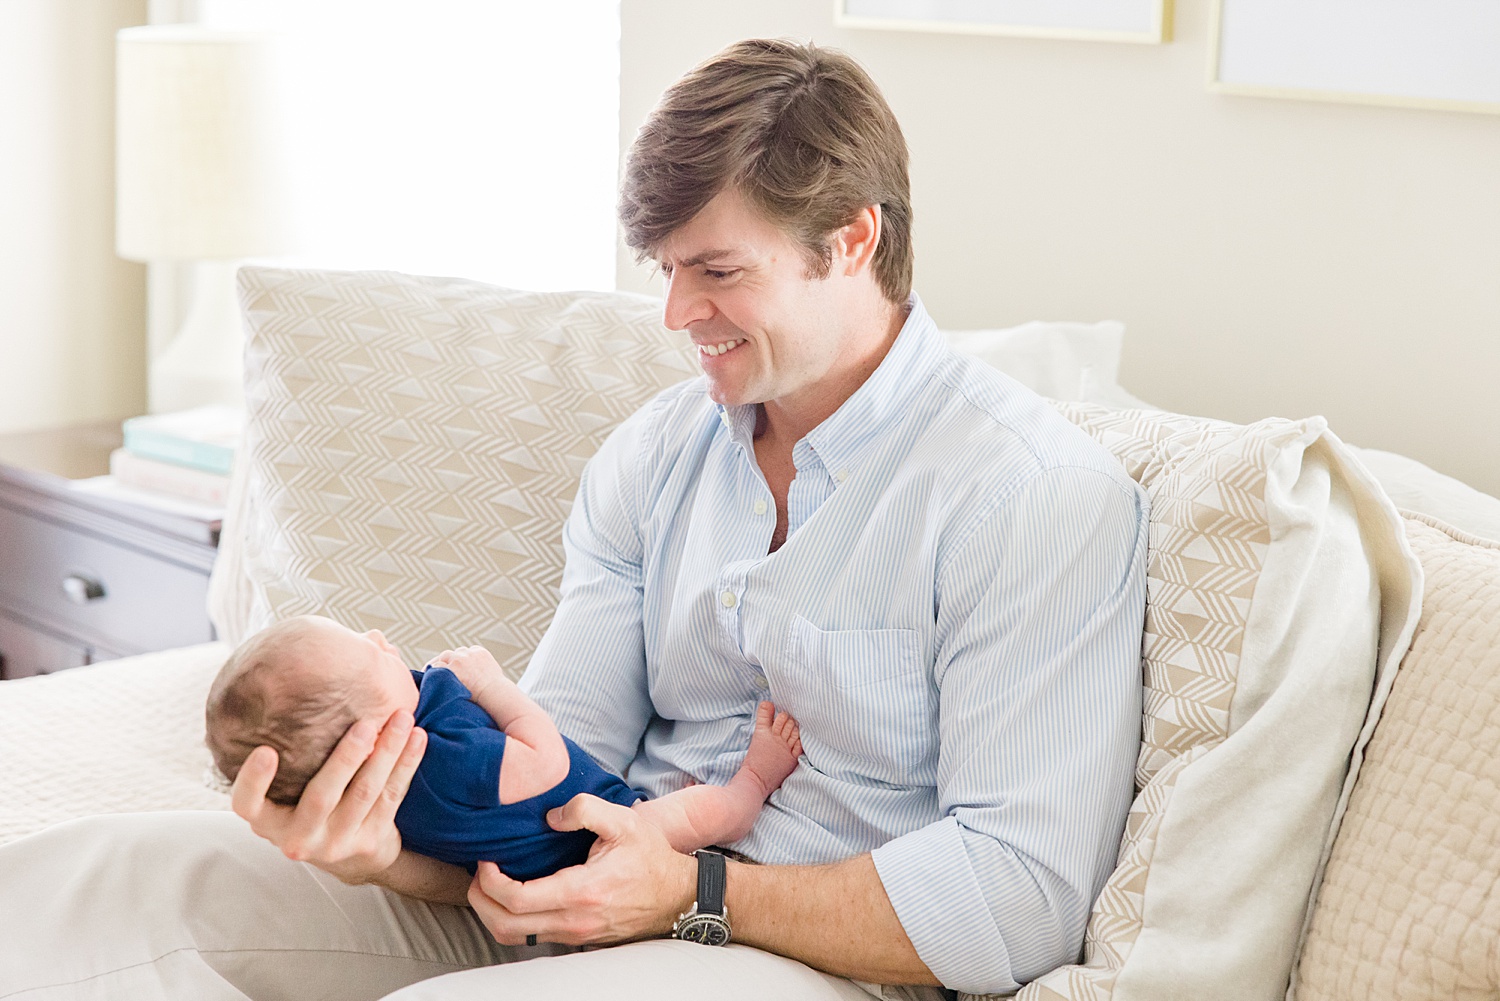 Dad looks down at newborn son during Cozy In-Home Newborn Session